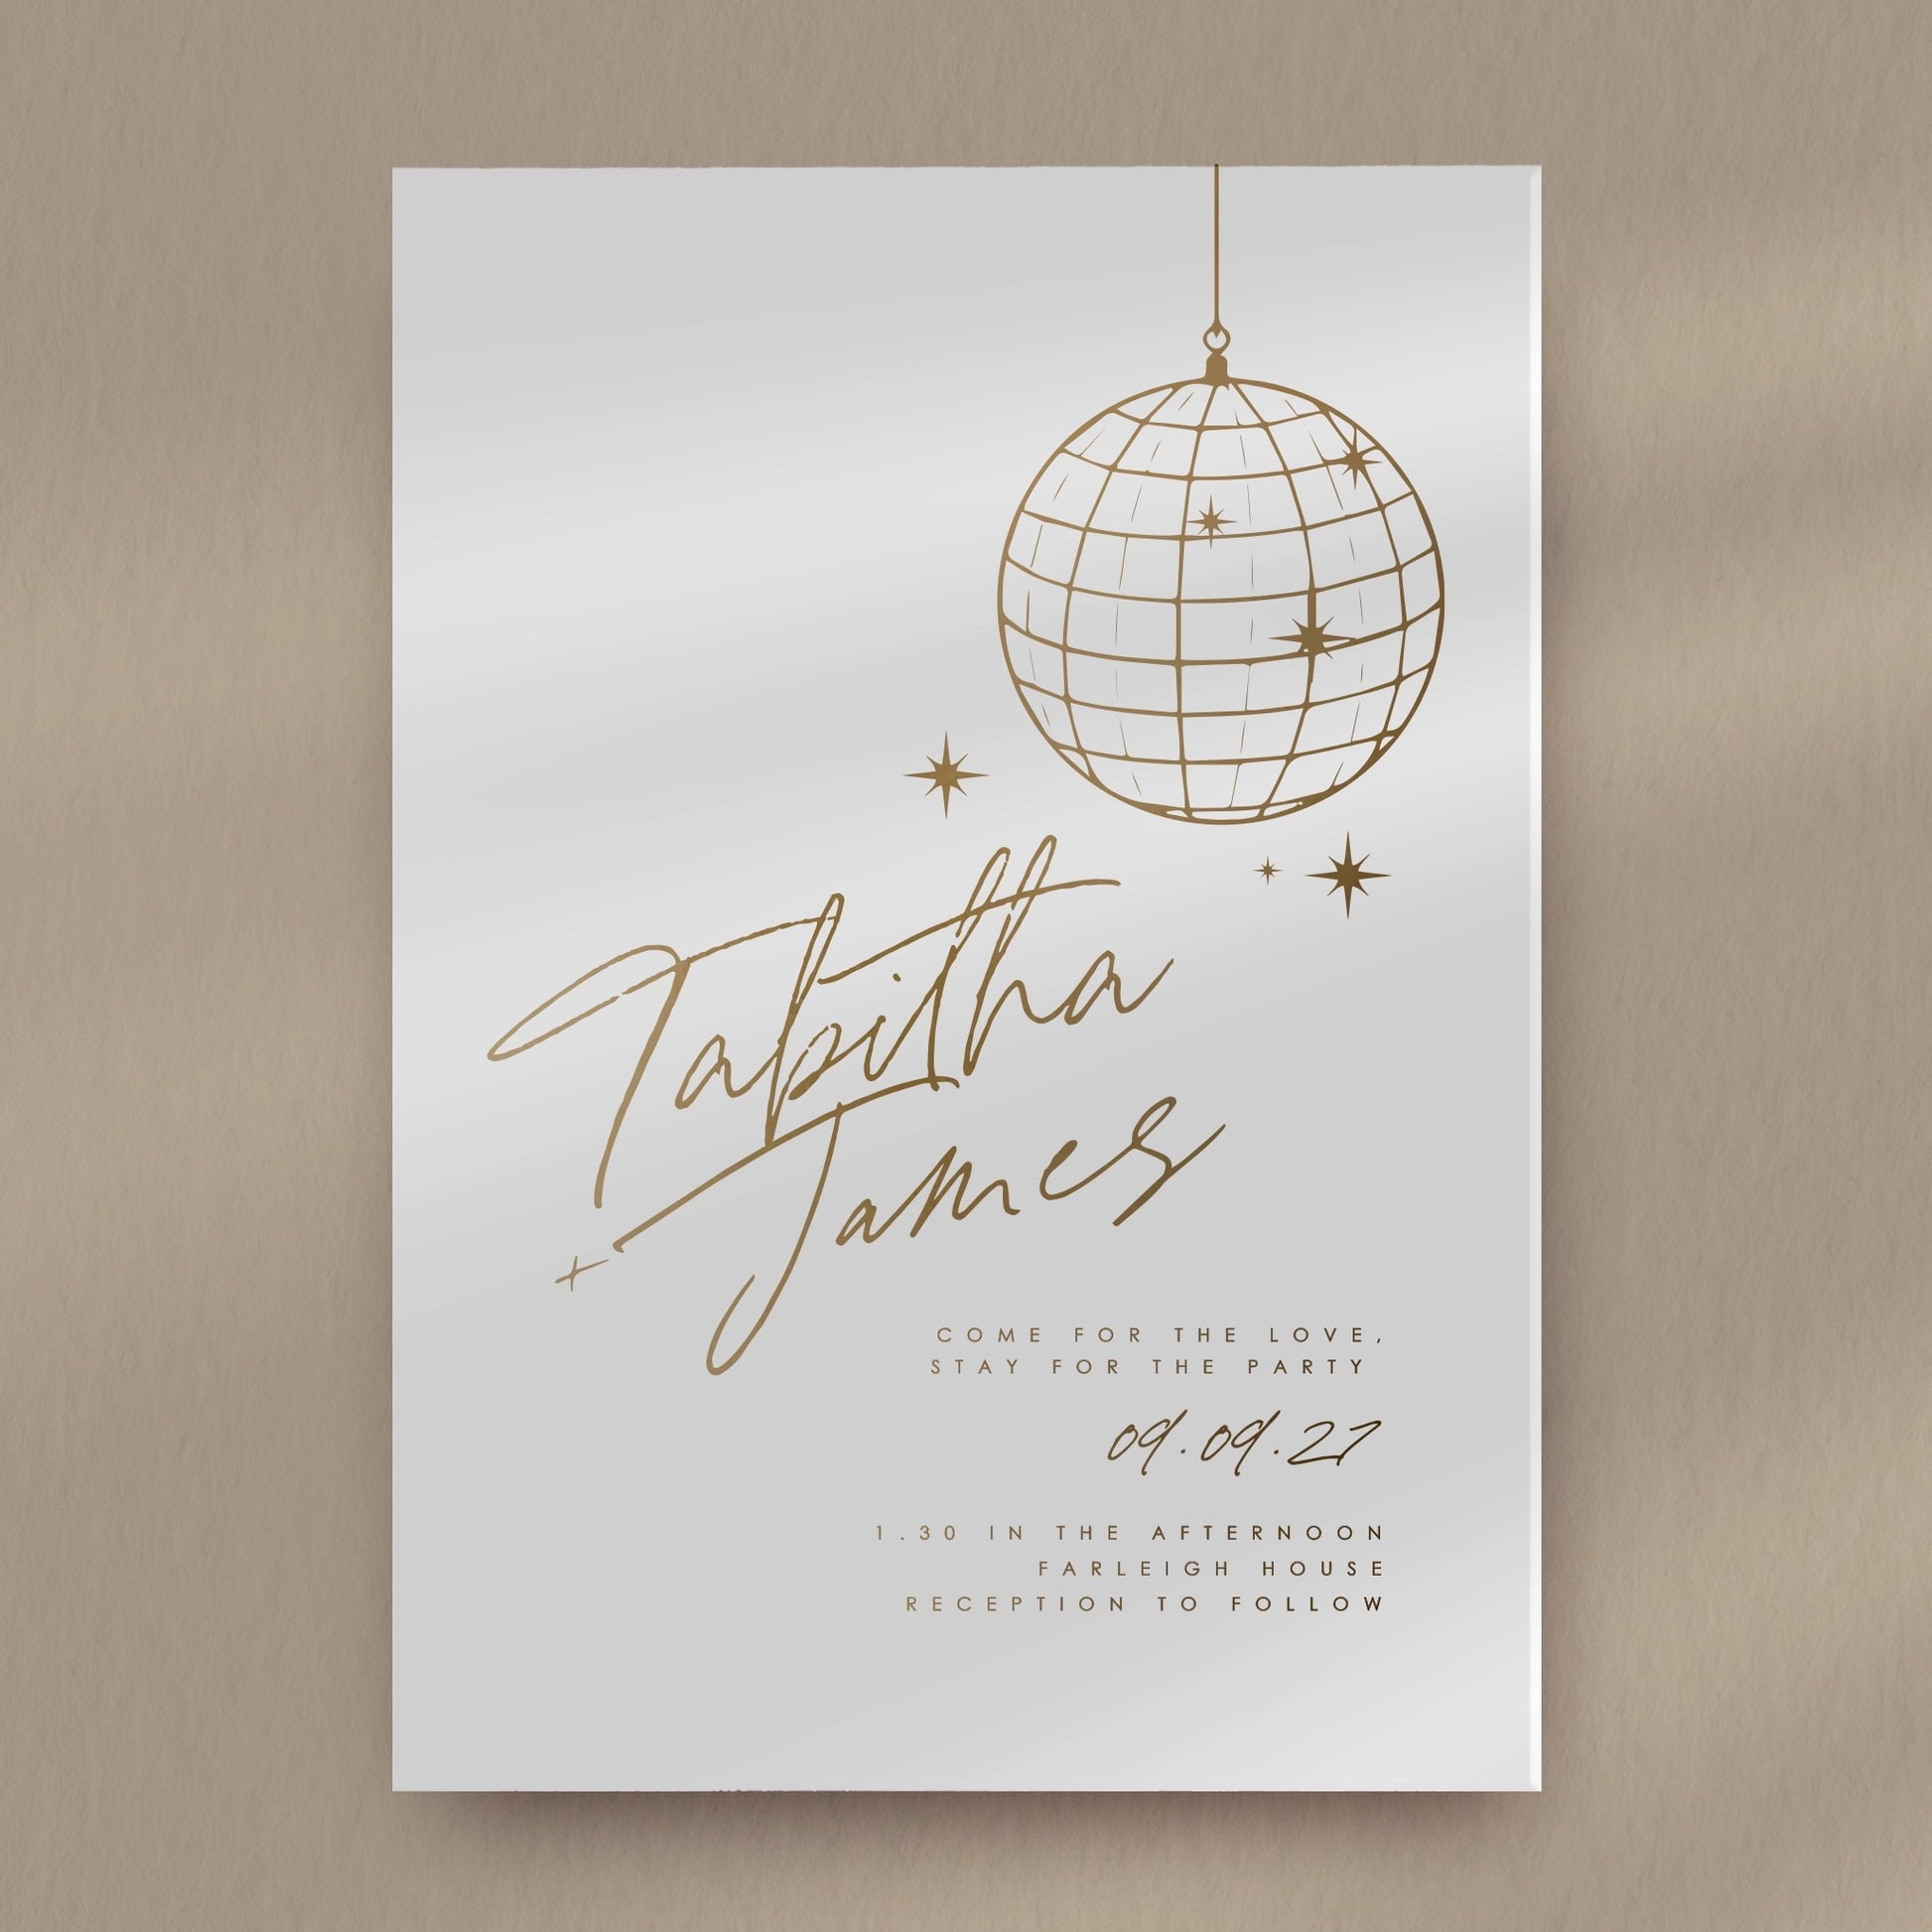 Day Invitation Sample  Ivy and Gold Wedding Stationery Tabitha  